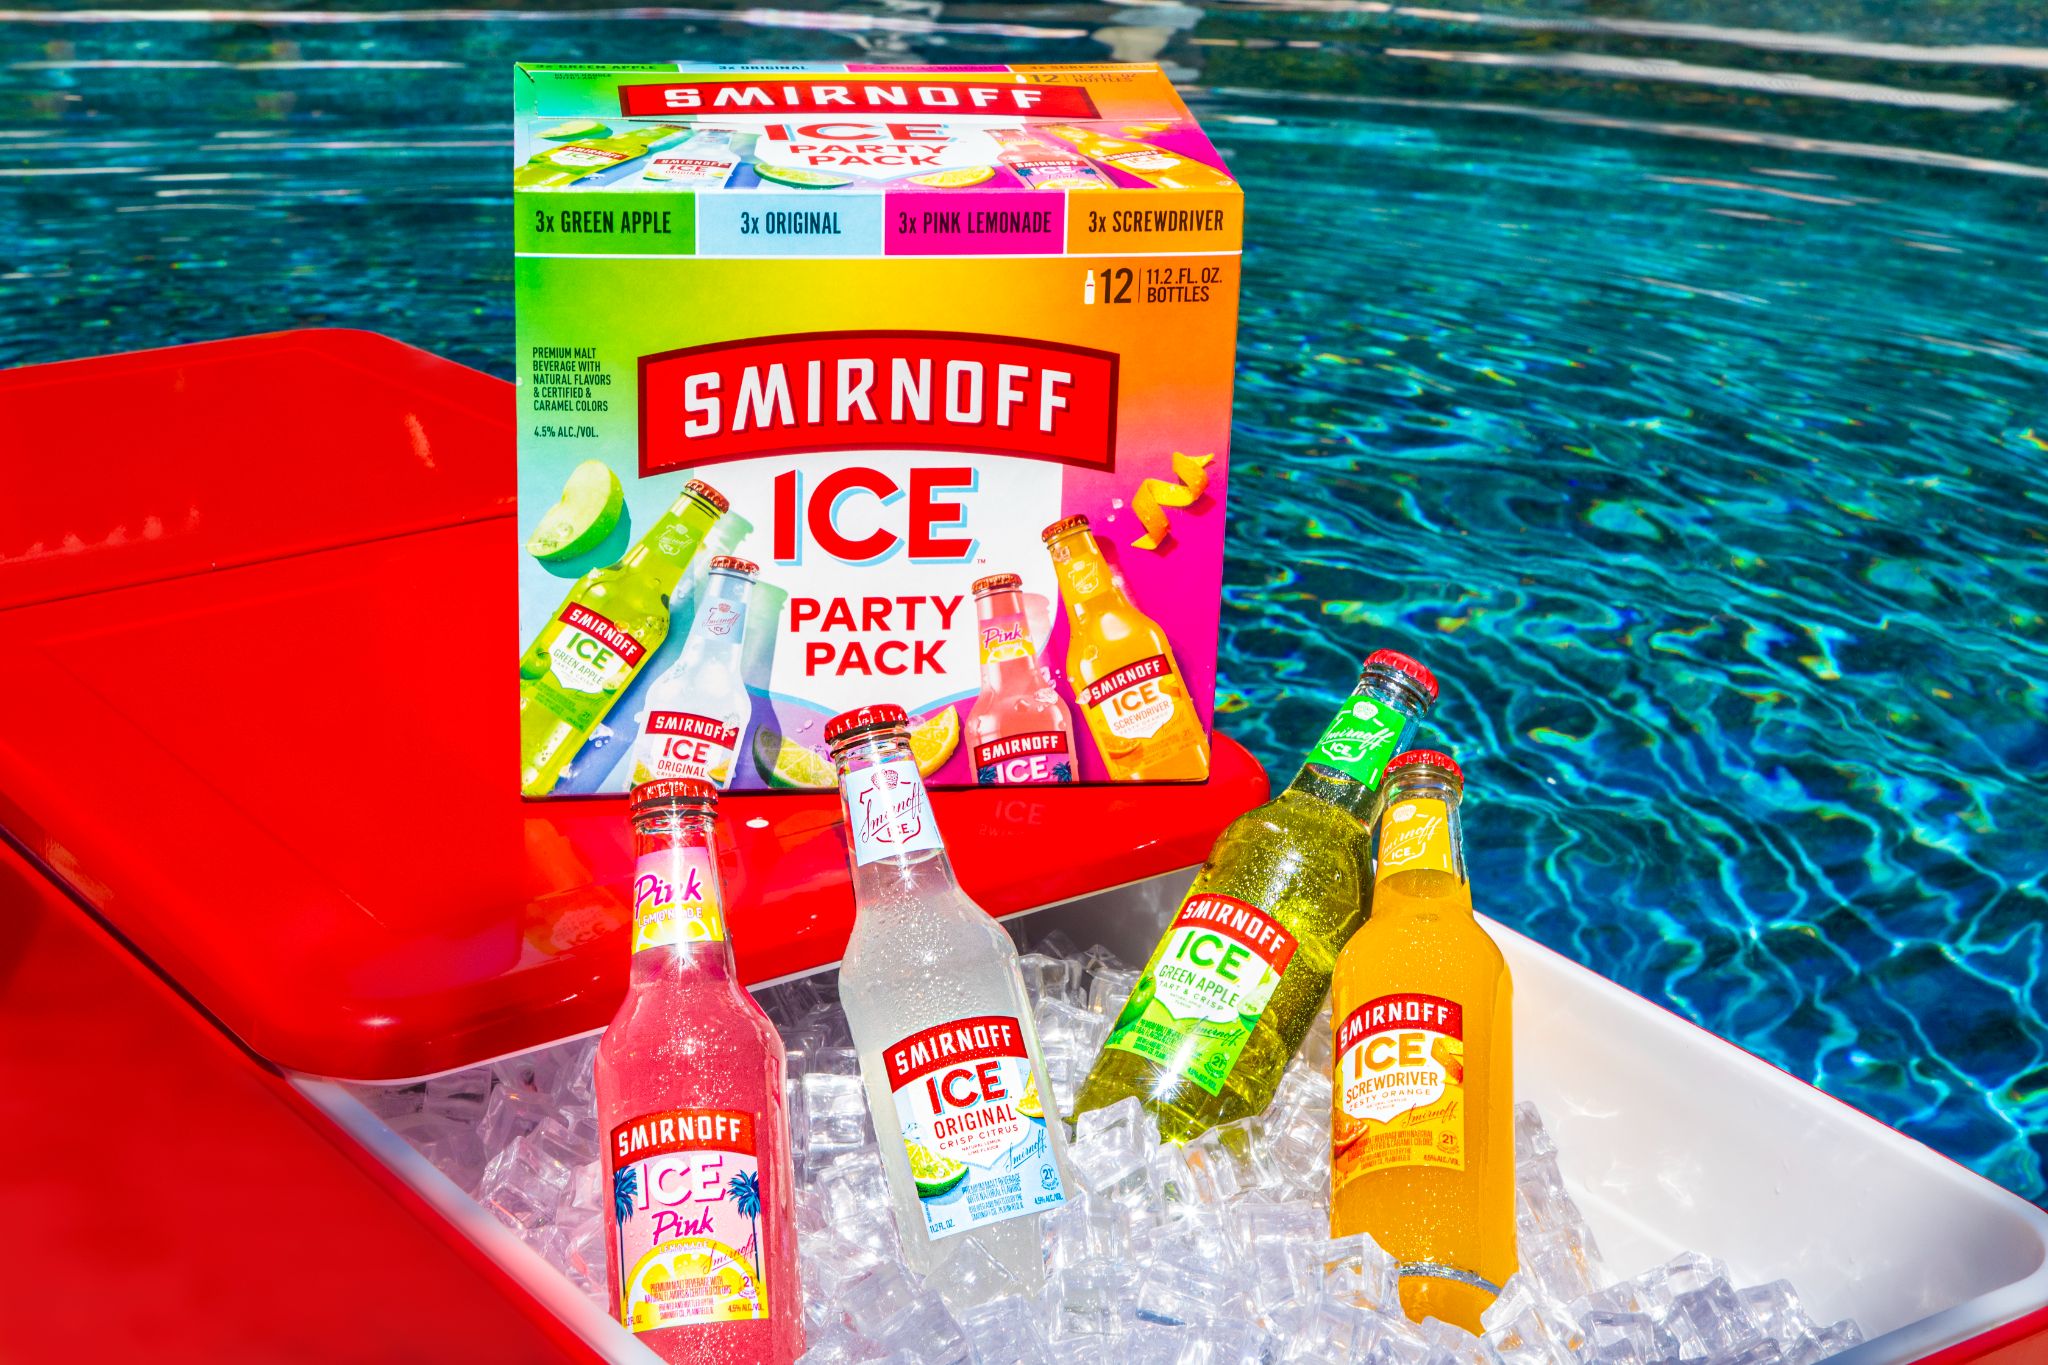 From culturally relevant limited editions to new innovations and zero sugar offerings, Smirnoff has always been known for quality and affordability, and prides itself on giving the people what they want.